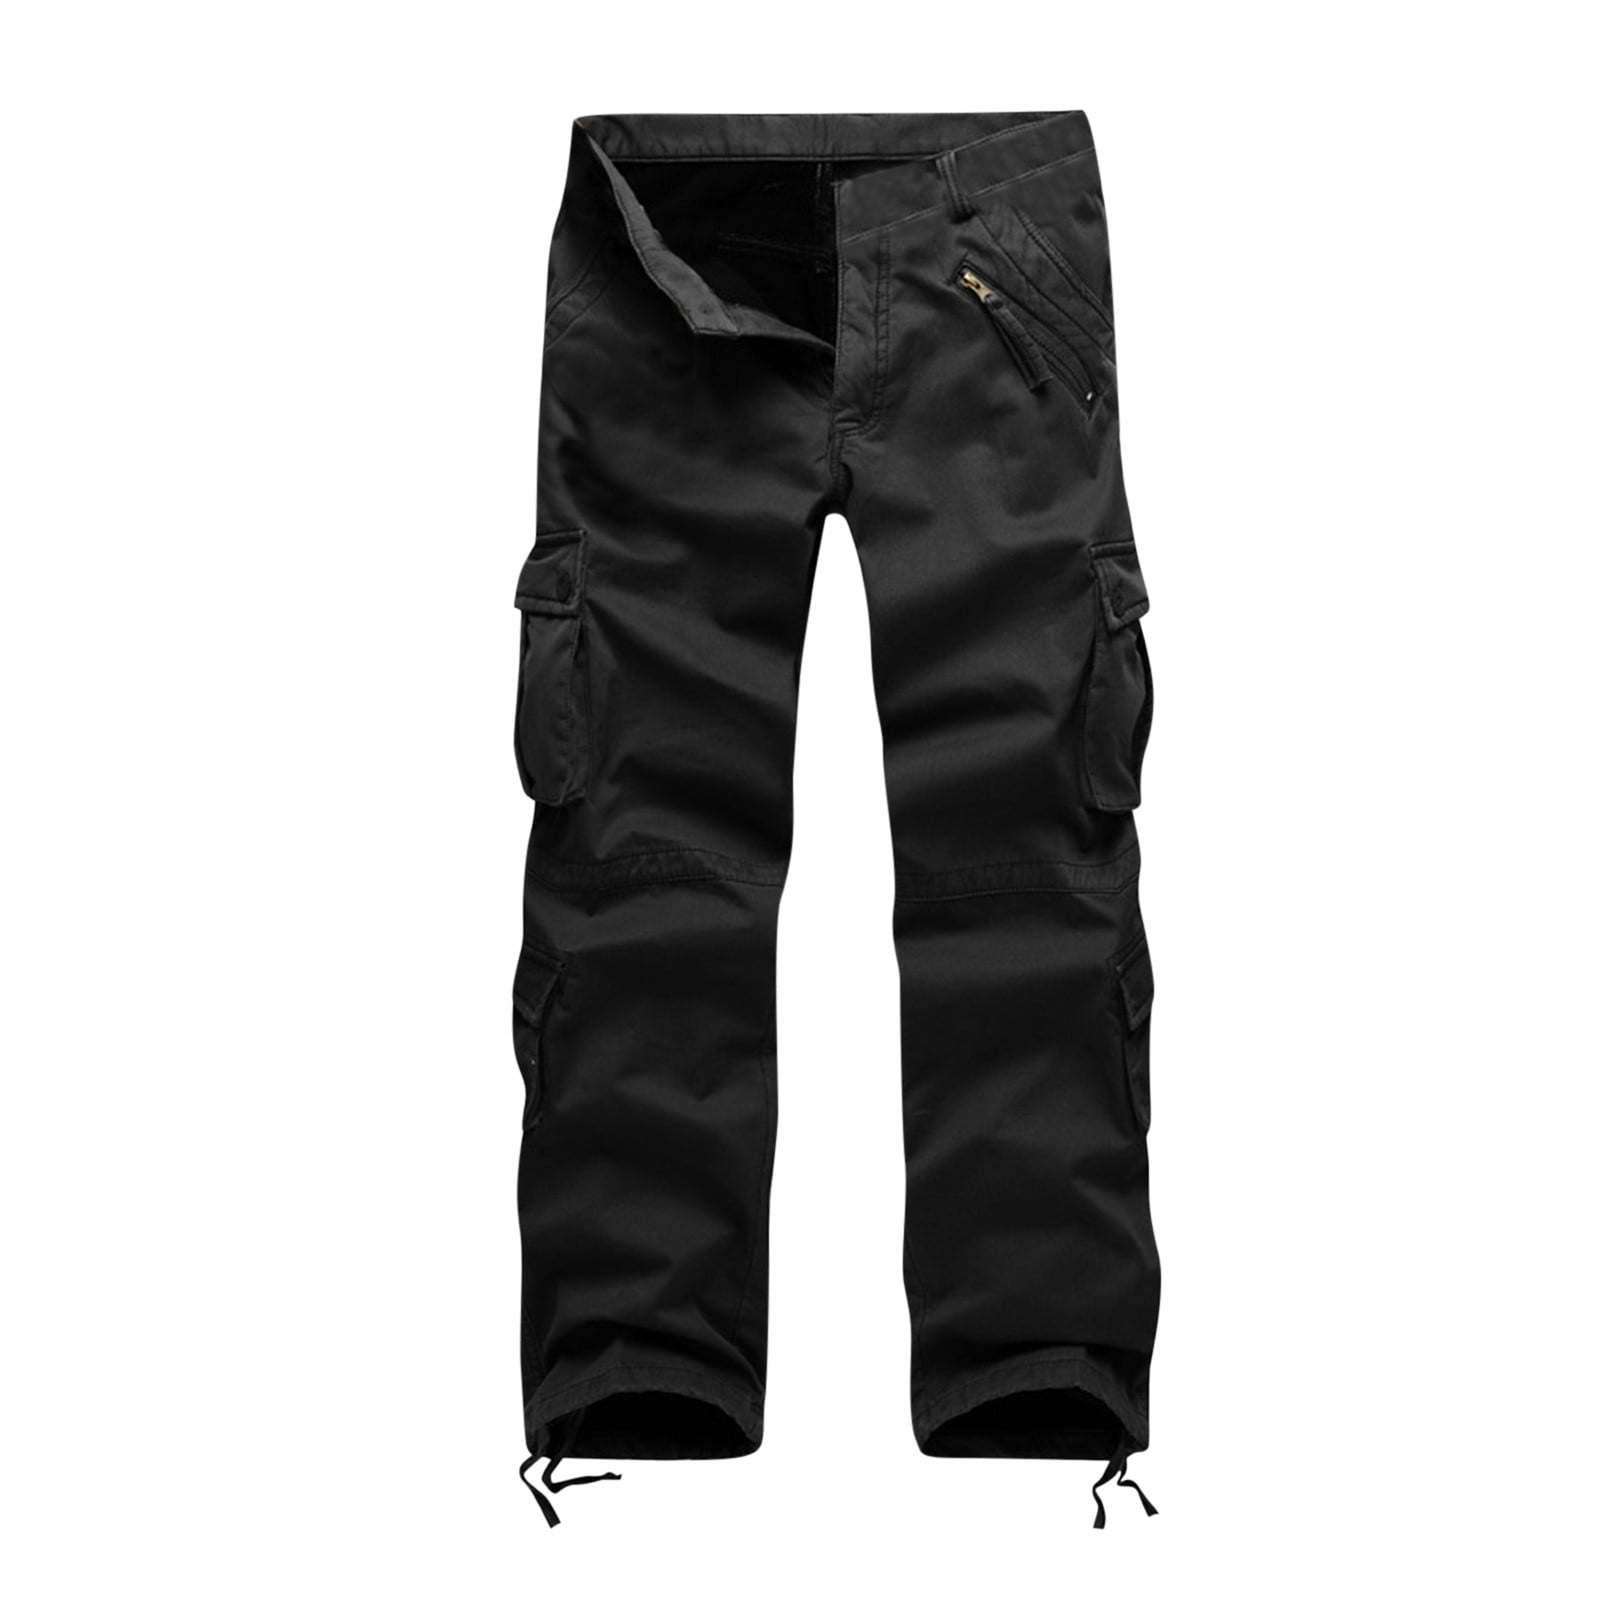 Women BLACK Army Cargo Pants Unisex Hip Hop Sashes Trousers BF Harajuku  Joggers High Waist Overalls Loose Casual Pants | Wish